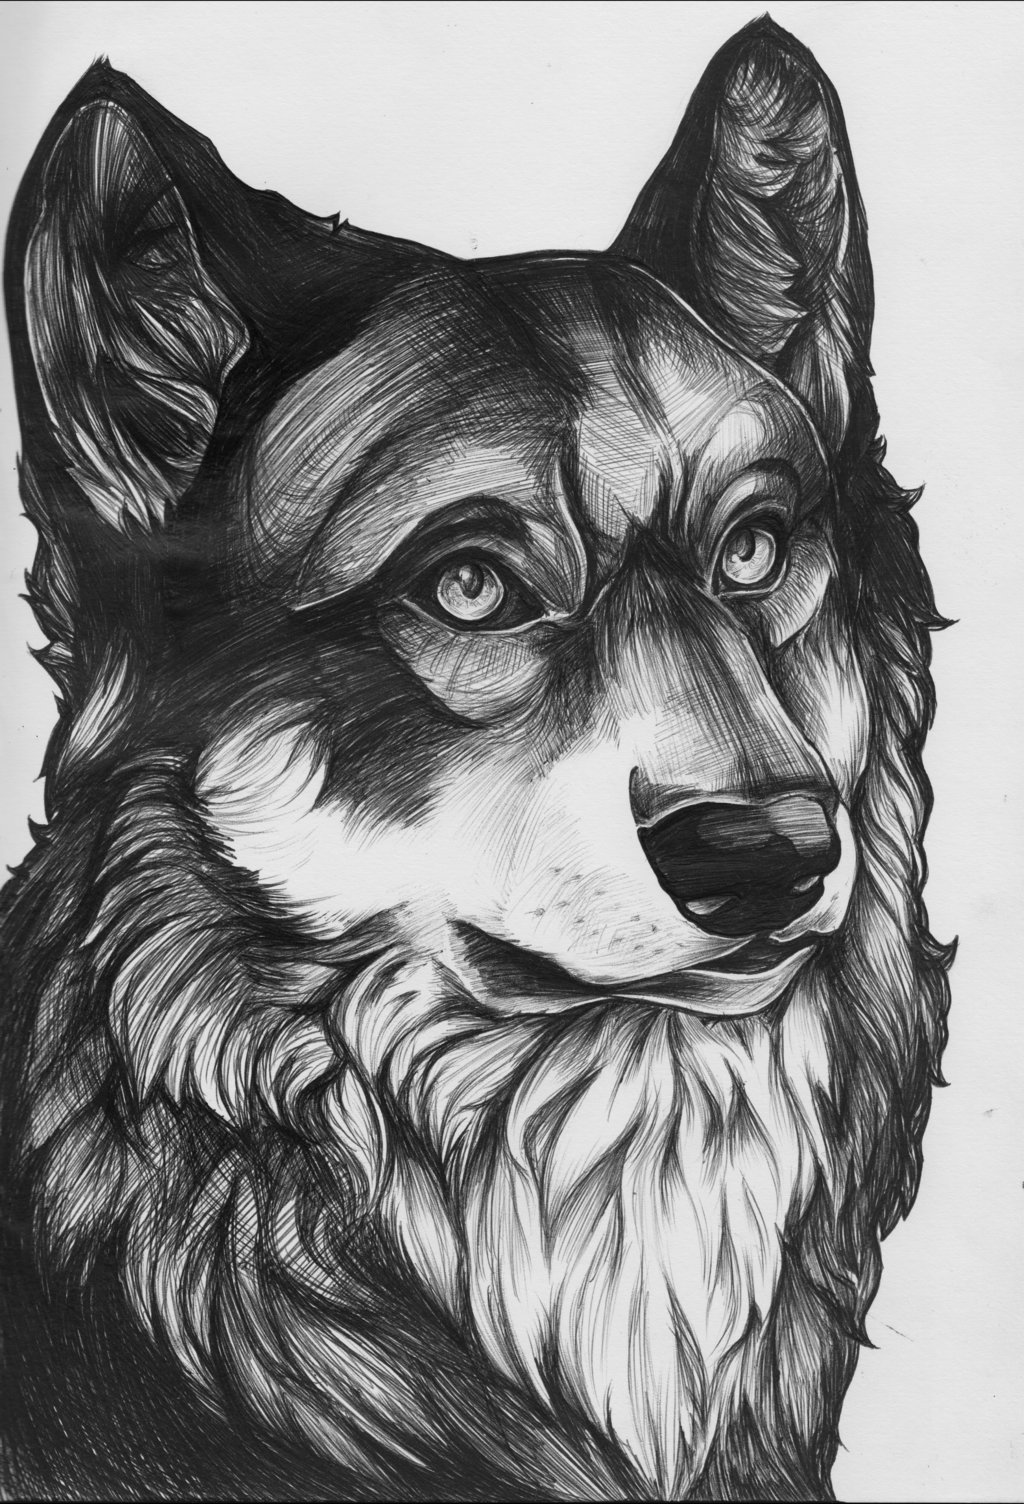 Kind-eyed wolf portrait by Blue Lioness